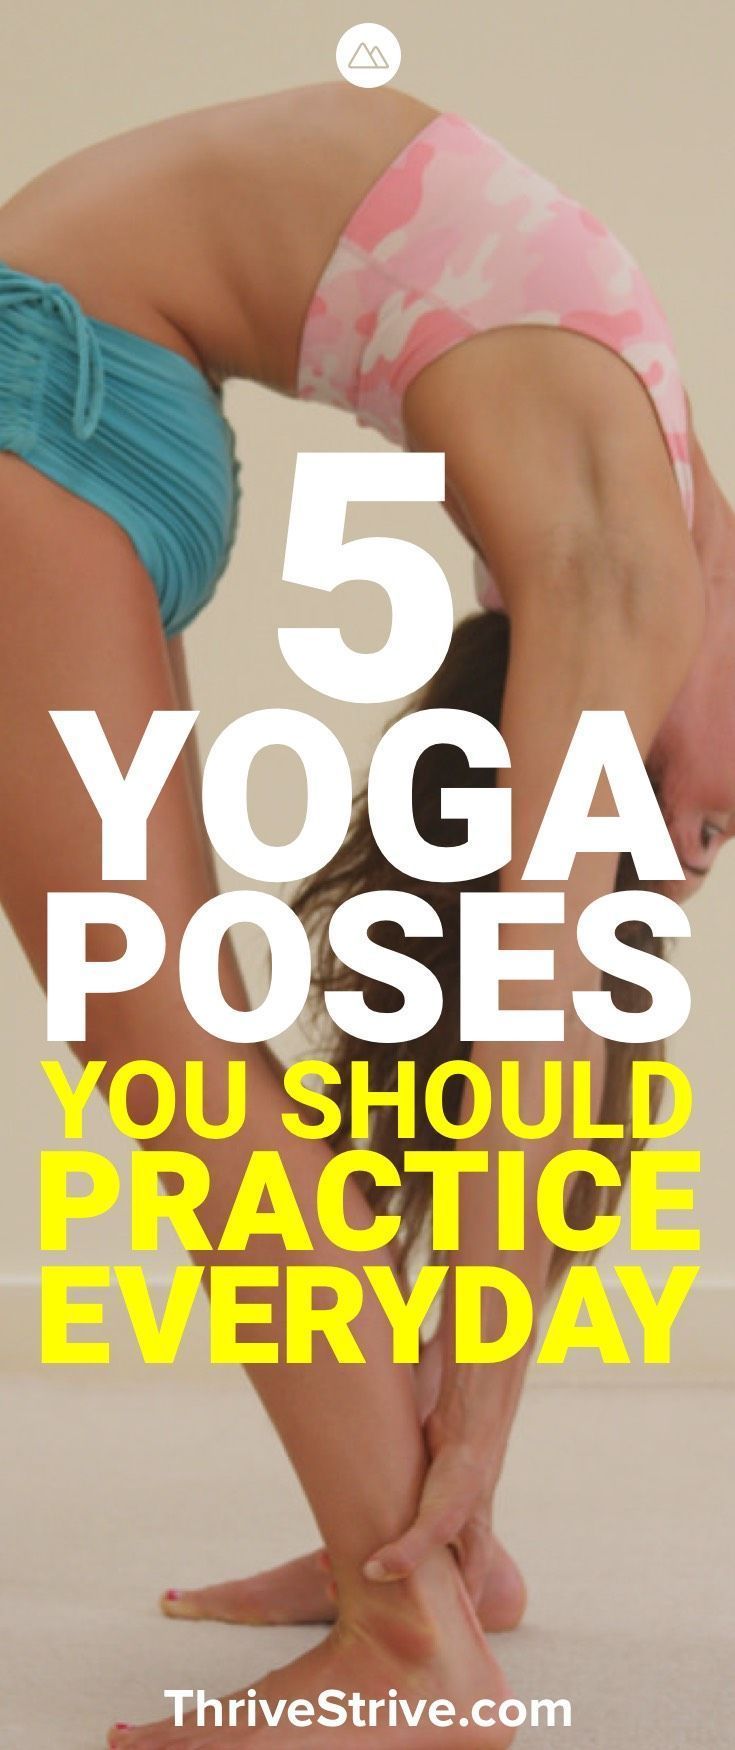 5 Yoga Poses You Should Practice Every Day to Improve Your Yoga Skills -   24 fitness yoga to get
 ideas